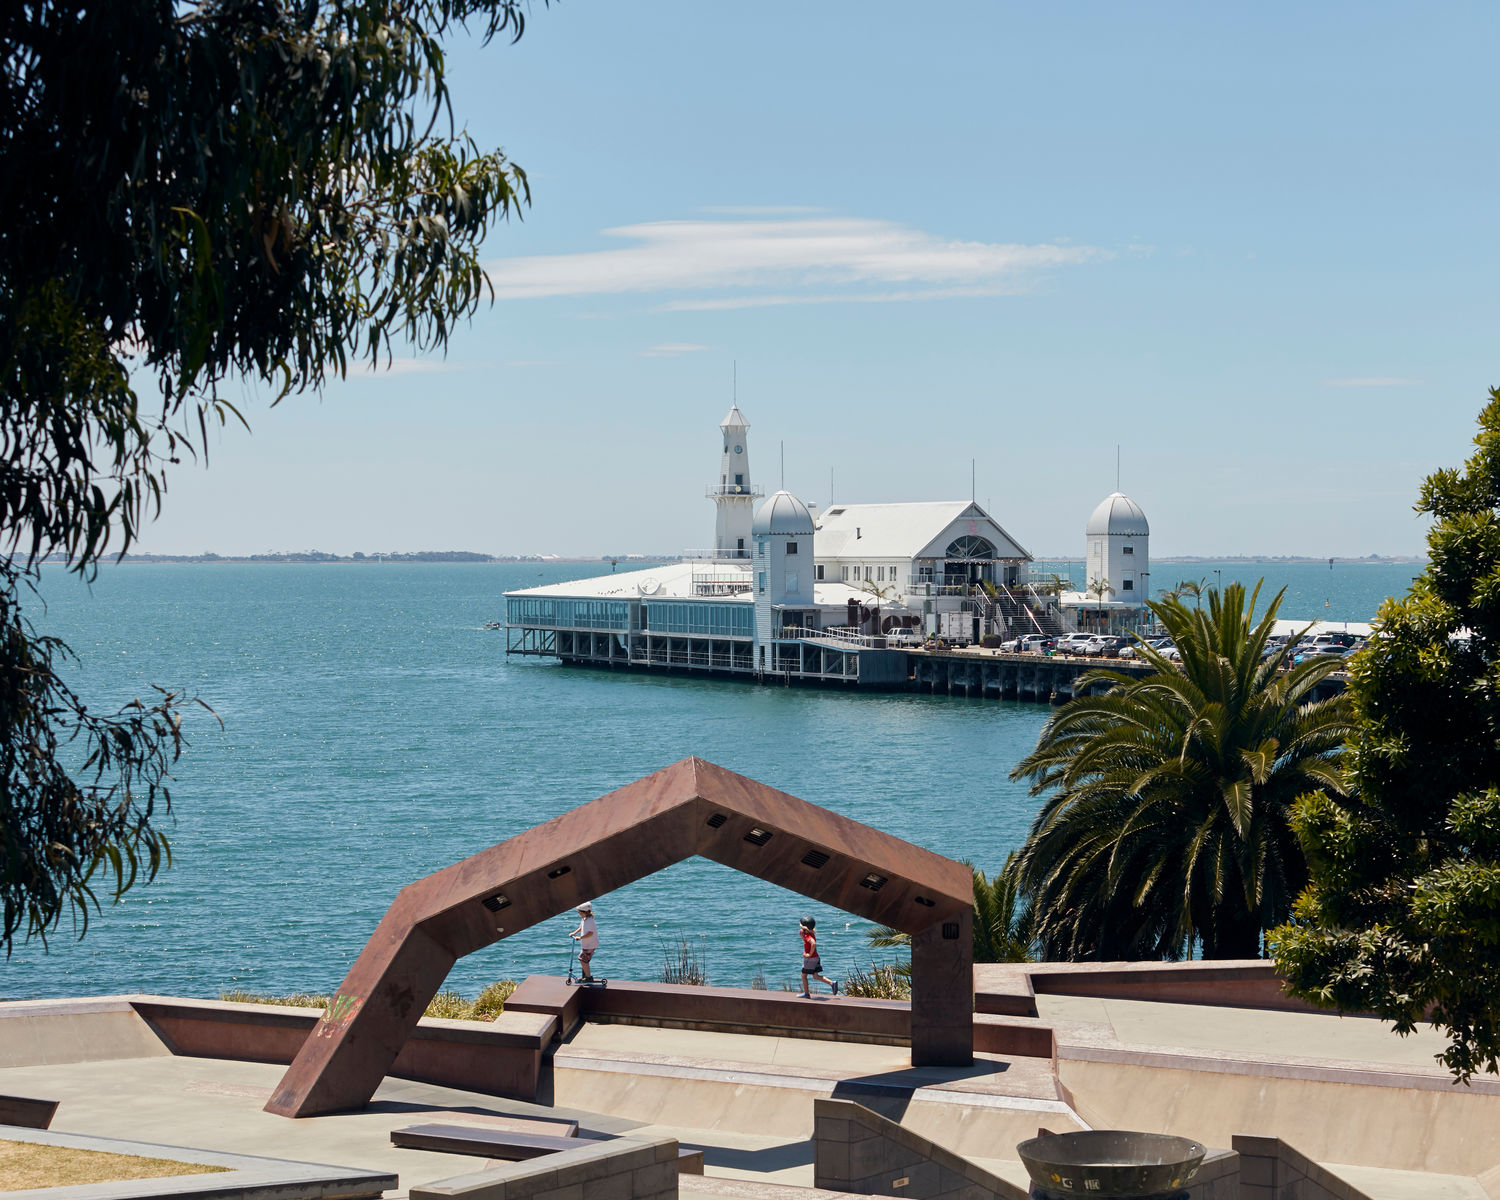 View of Geelong harbour from Geelong Waterfront Campus